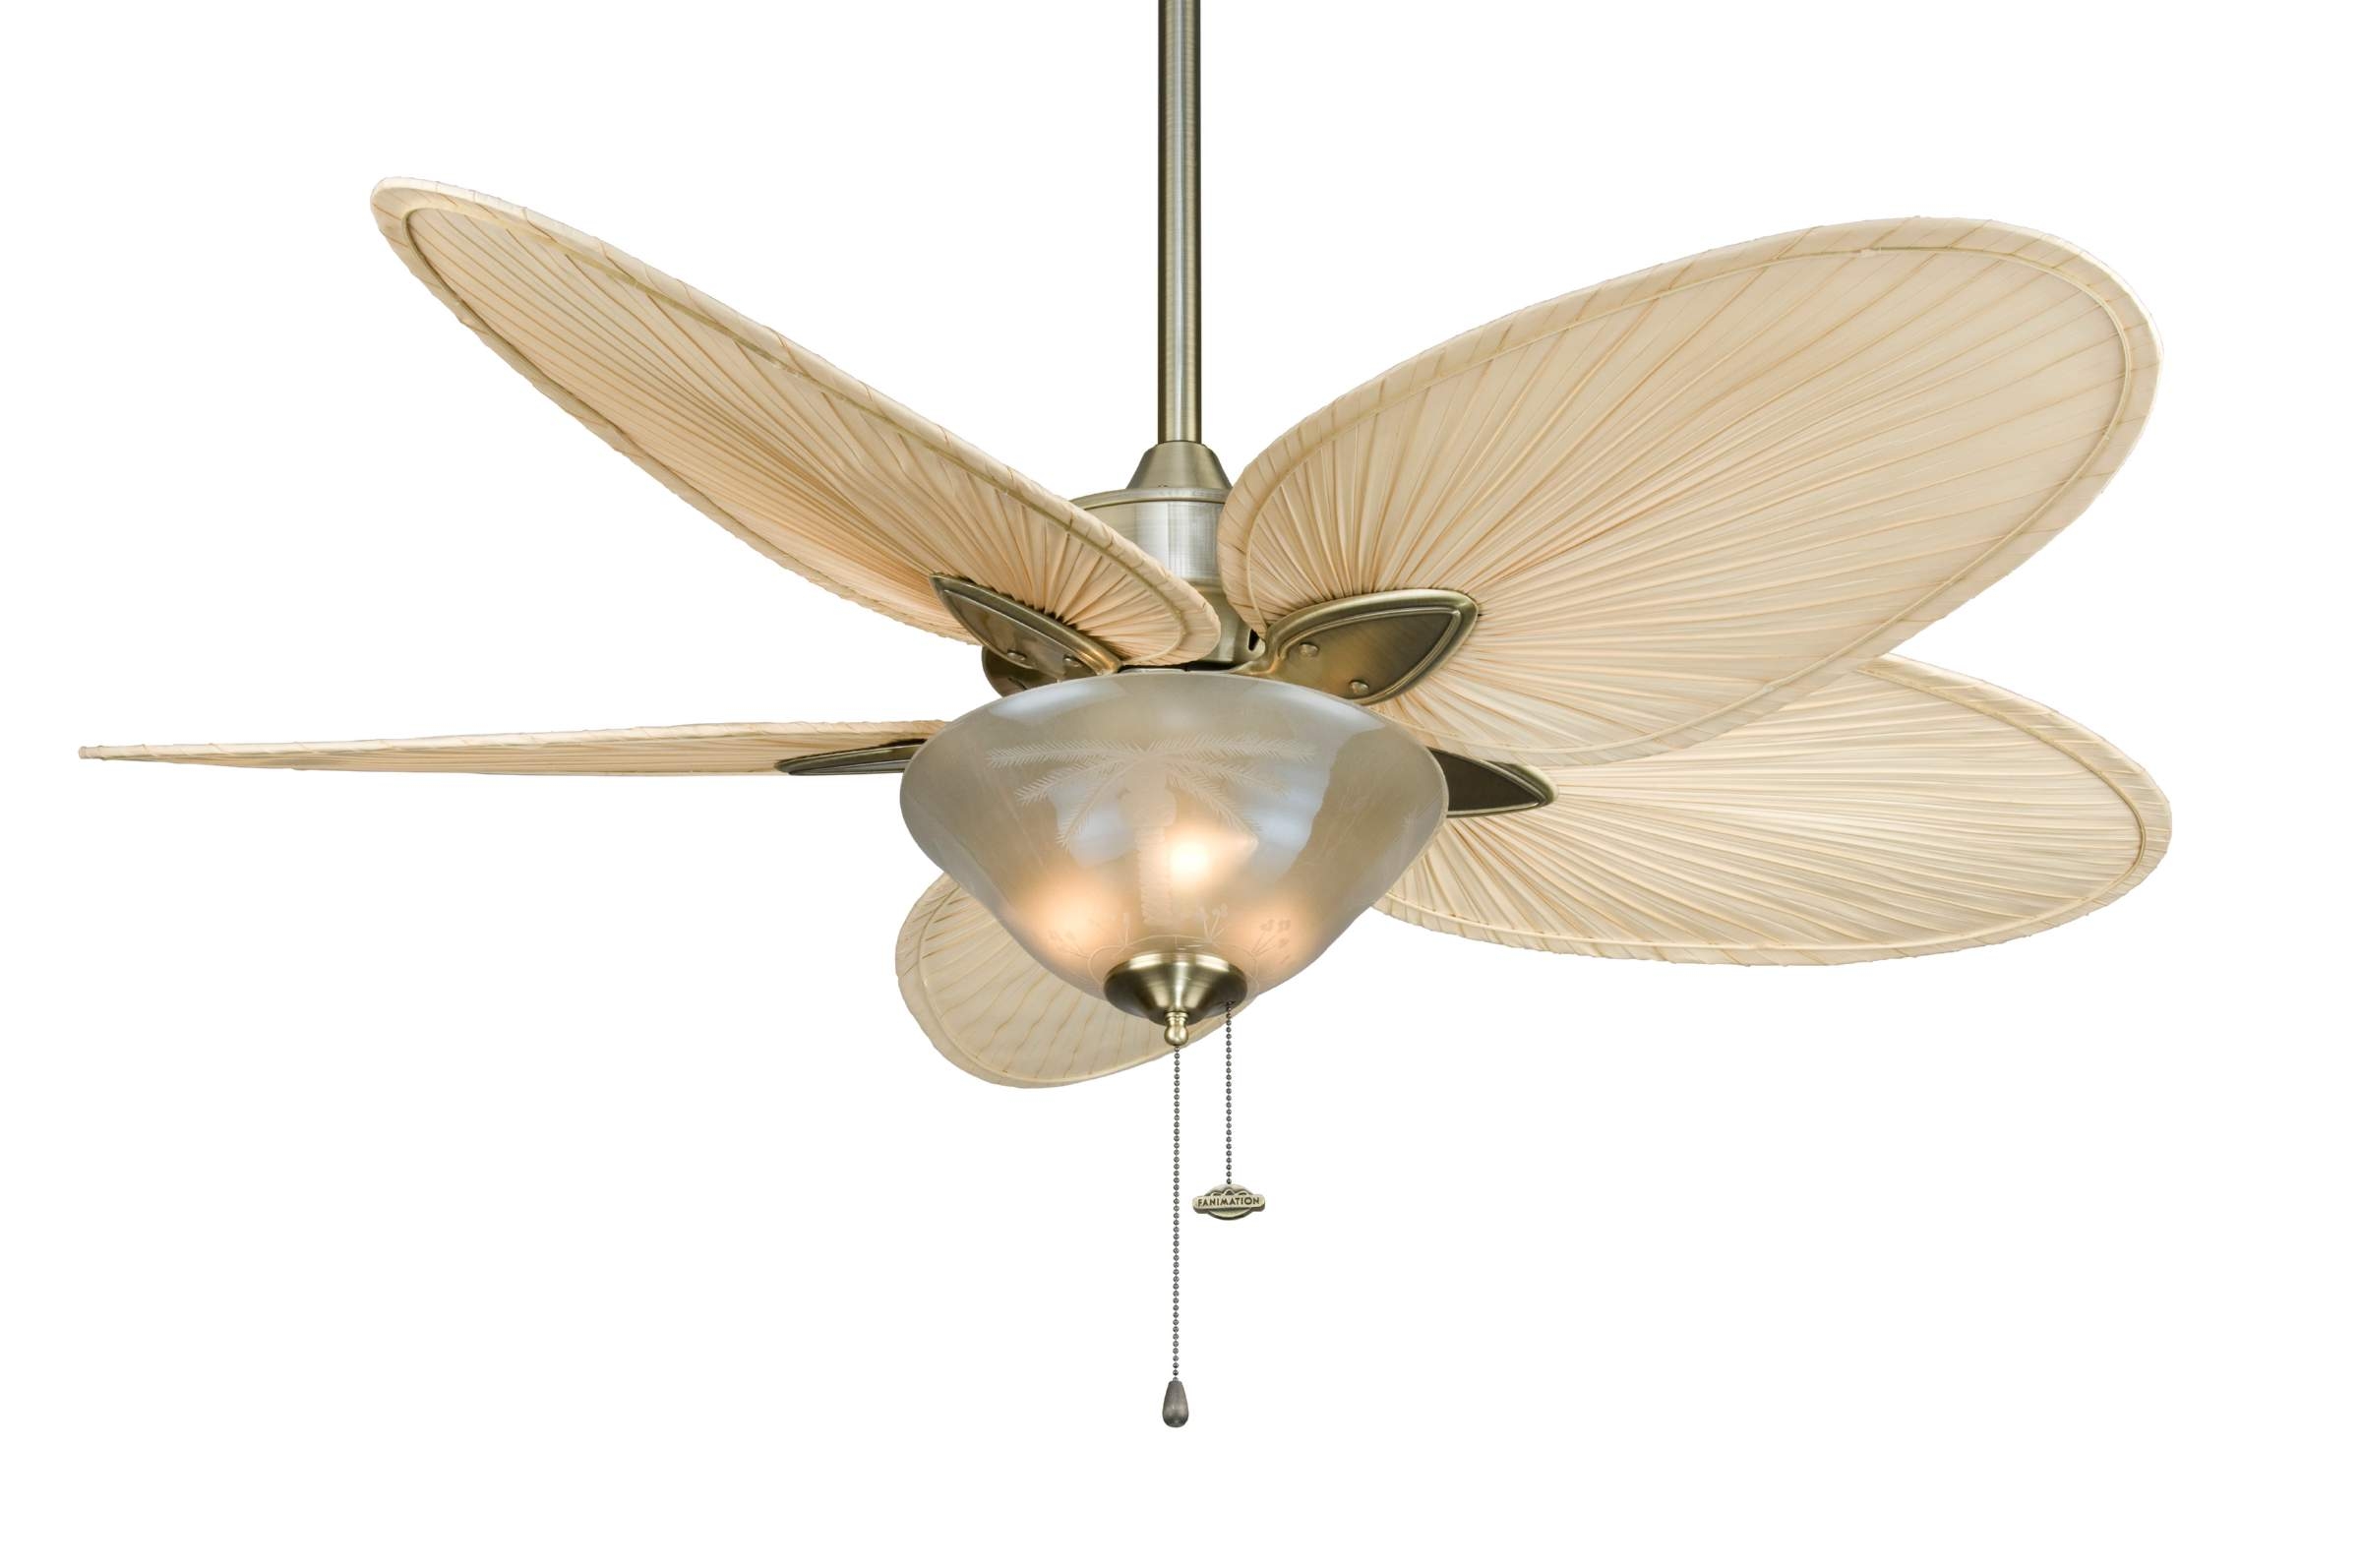 Palm Leaf Ceiling Fan With Light Kitceiling interesting palm leaf ceiling fan with light palm leaf